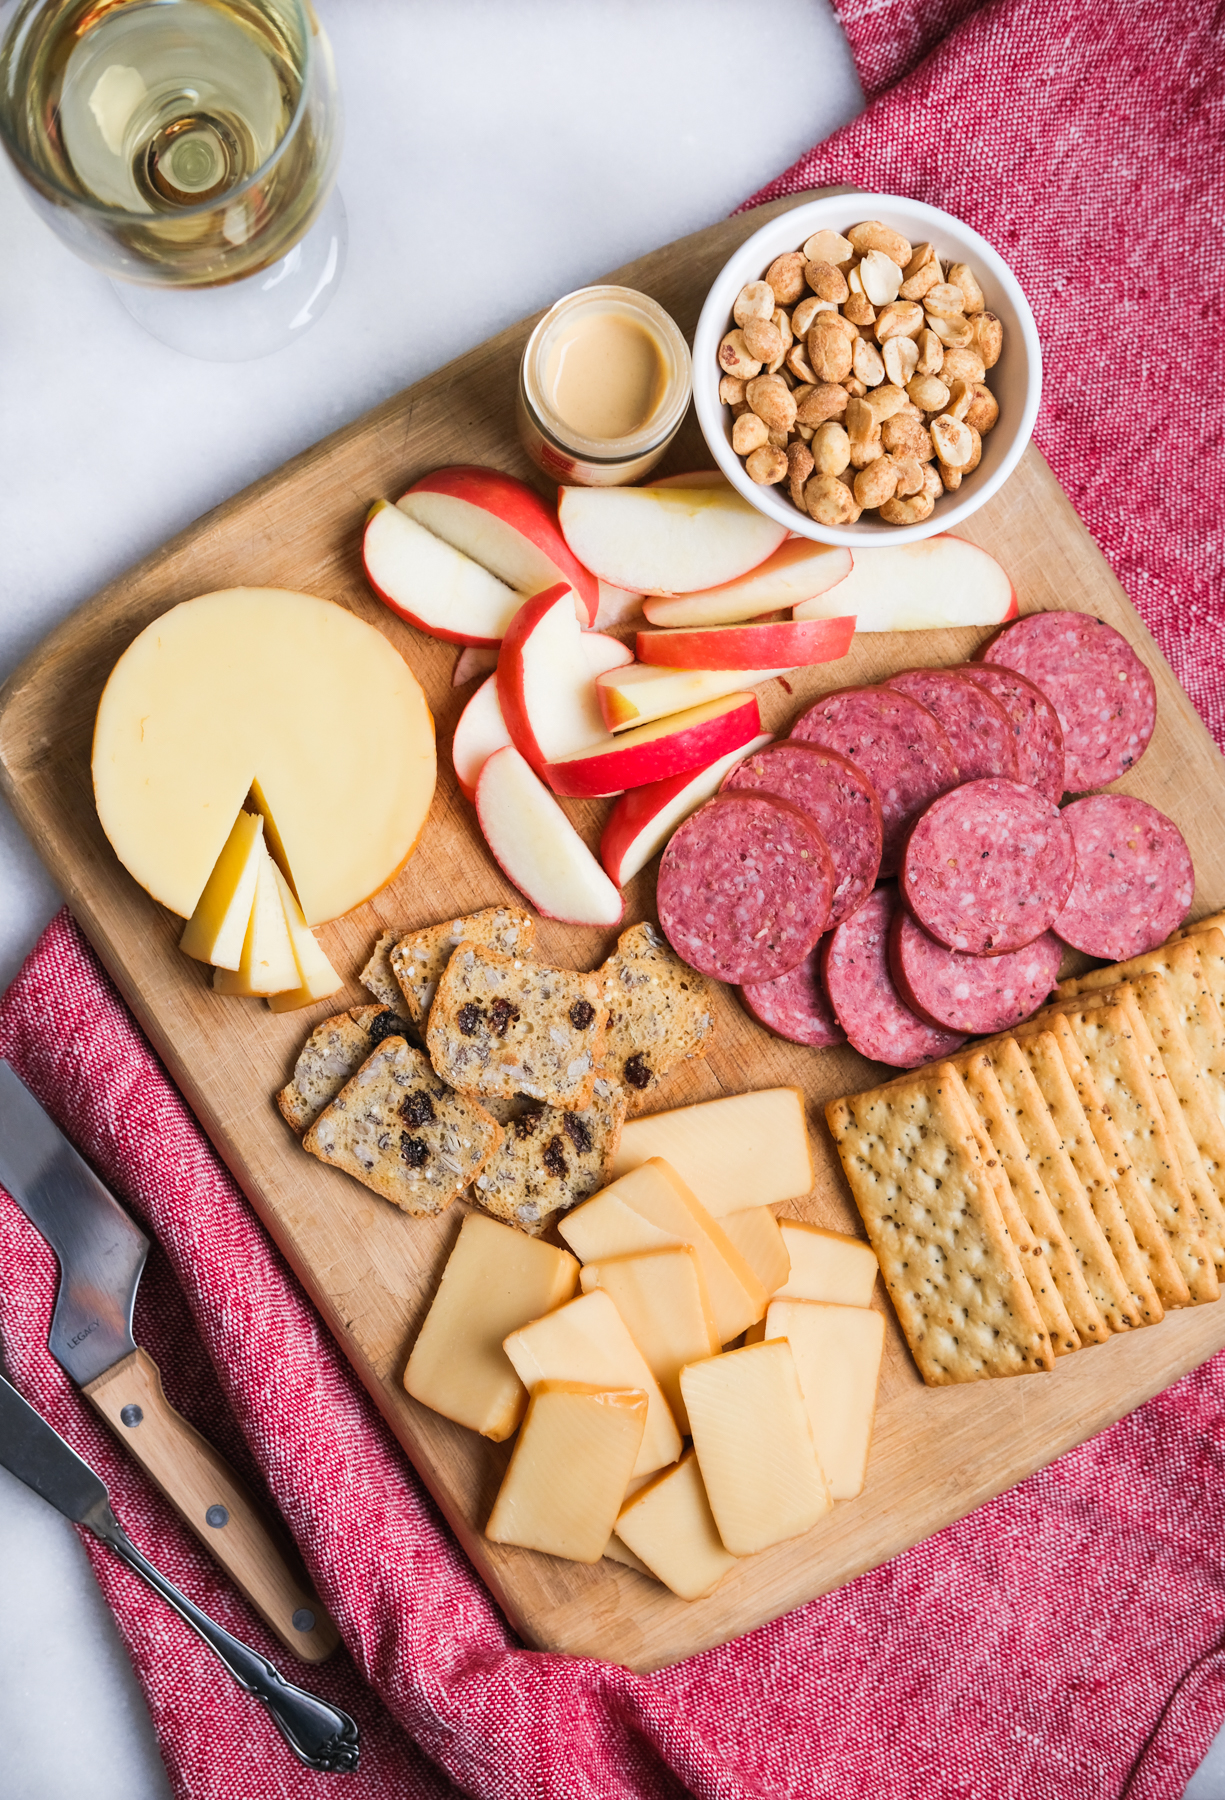 How to Make a Cheese Board: My Easy Formula